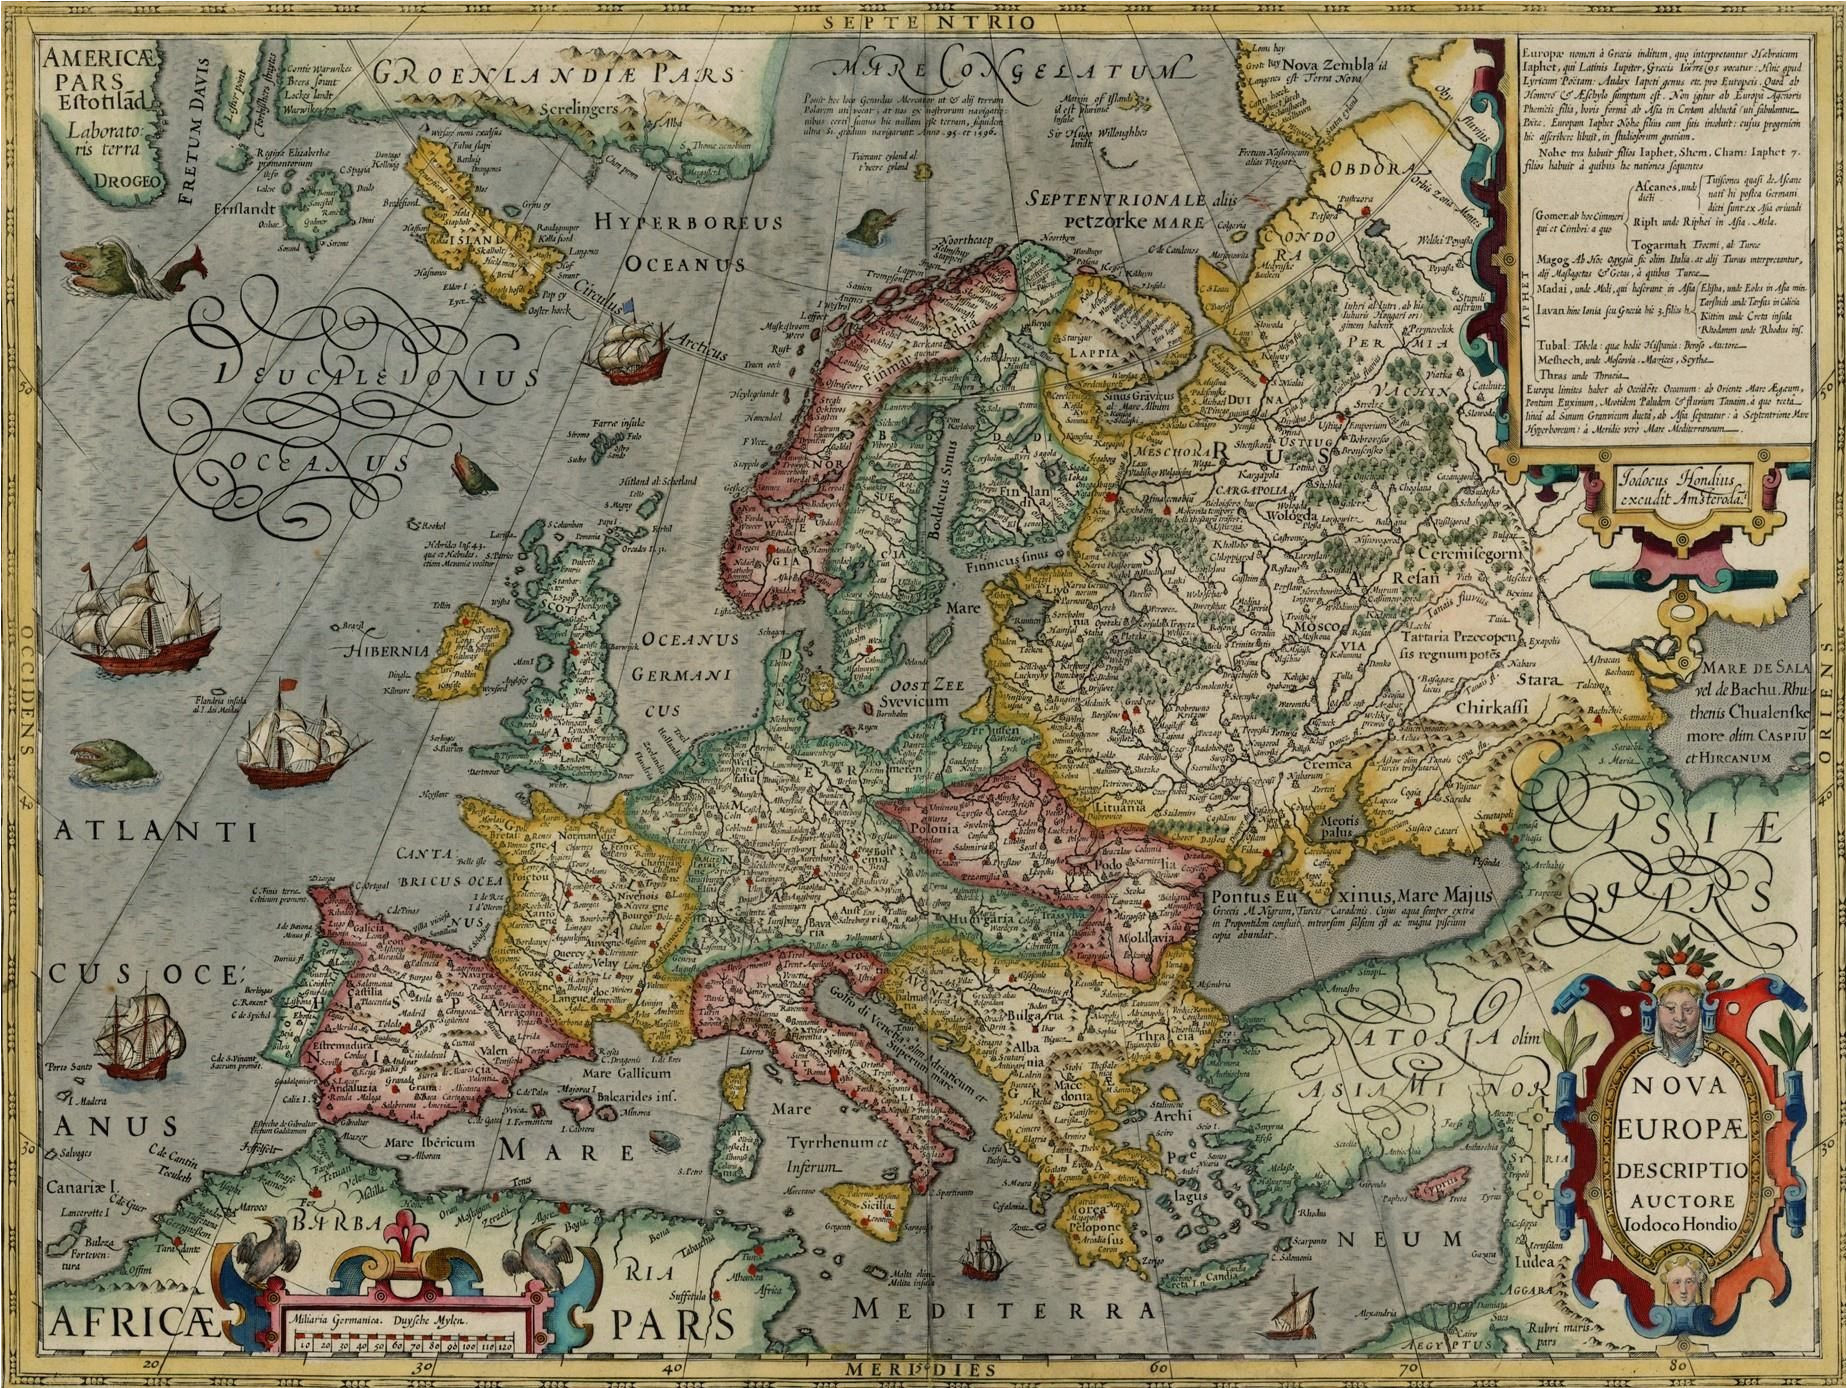 Jersey Europe Map Map Of Europe by Jodocus Hondius 1630 the Map Shows A